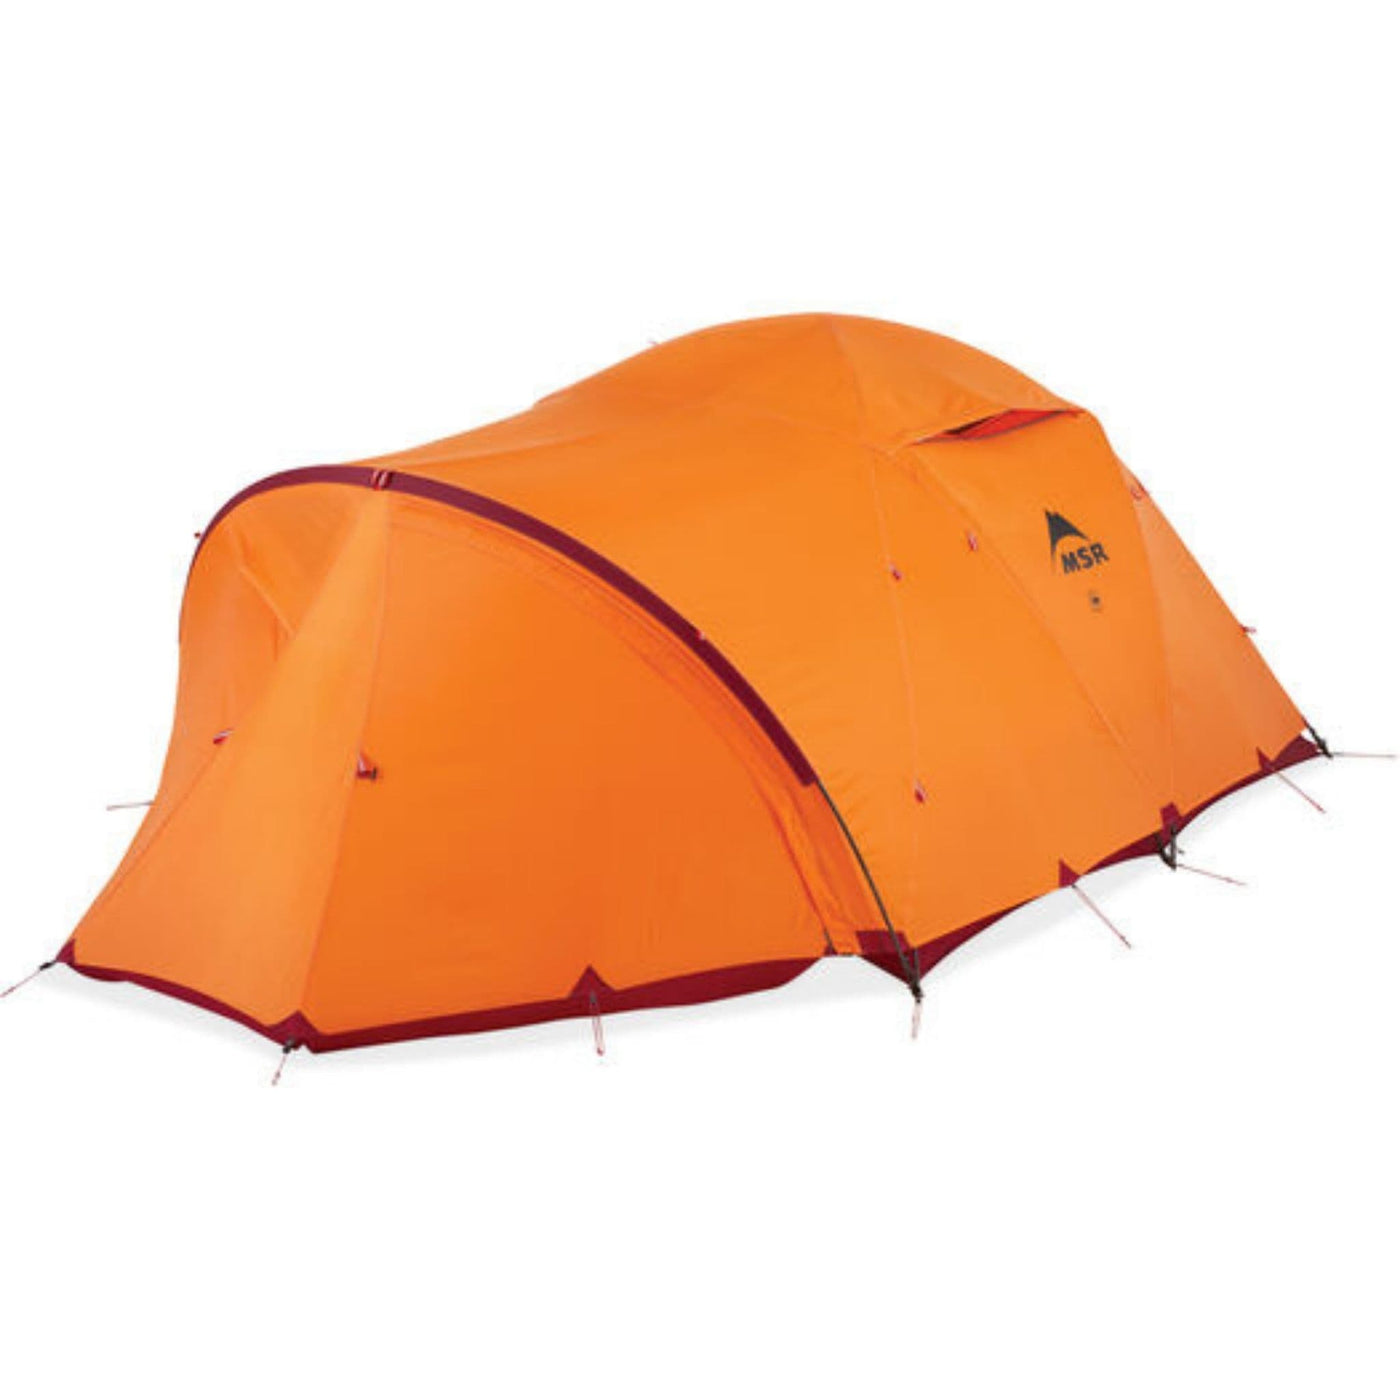 MSR Remote 3 Tent | 4 Season Mountaineering Tent NZ | Further Faster Christchurch NZ